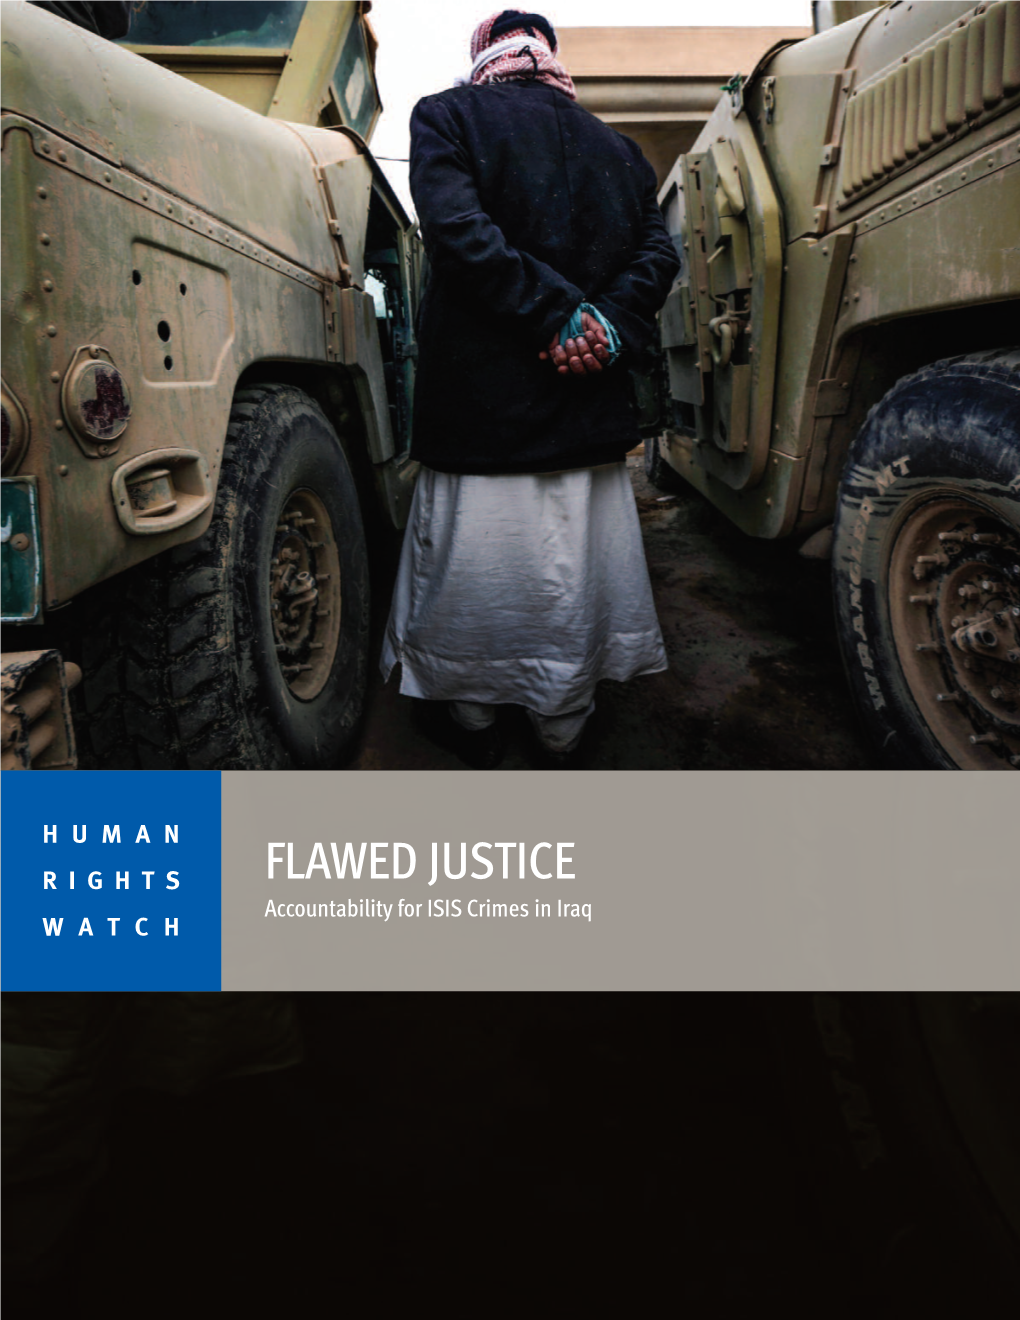 Flawed Justice: Accountability for ISIS Crimes in Iraq